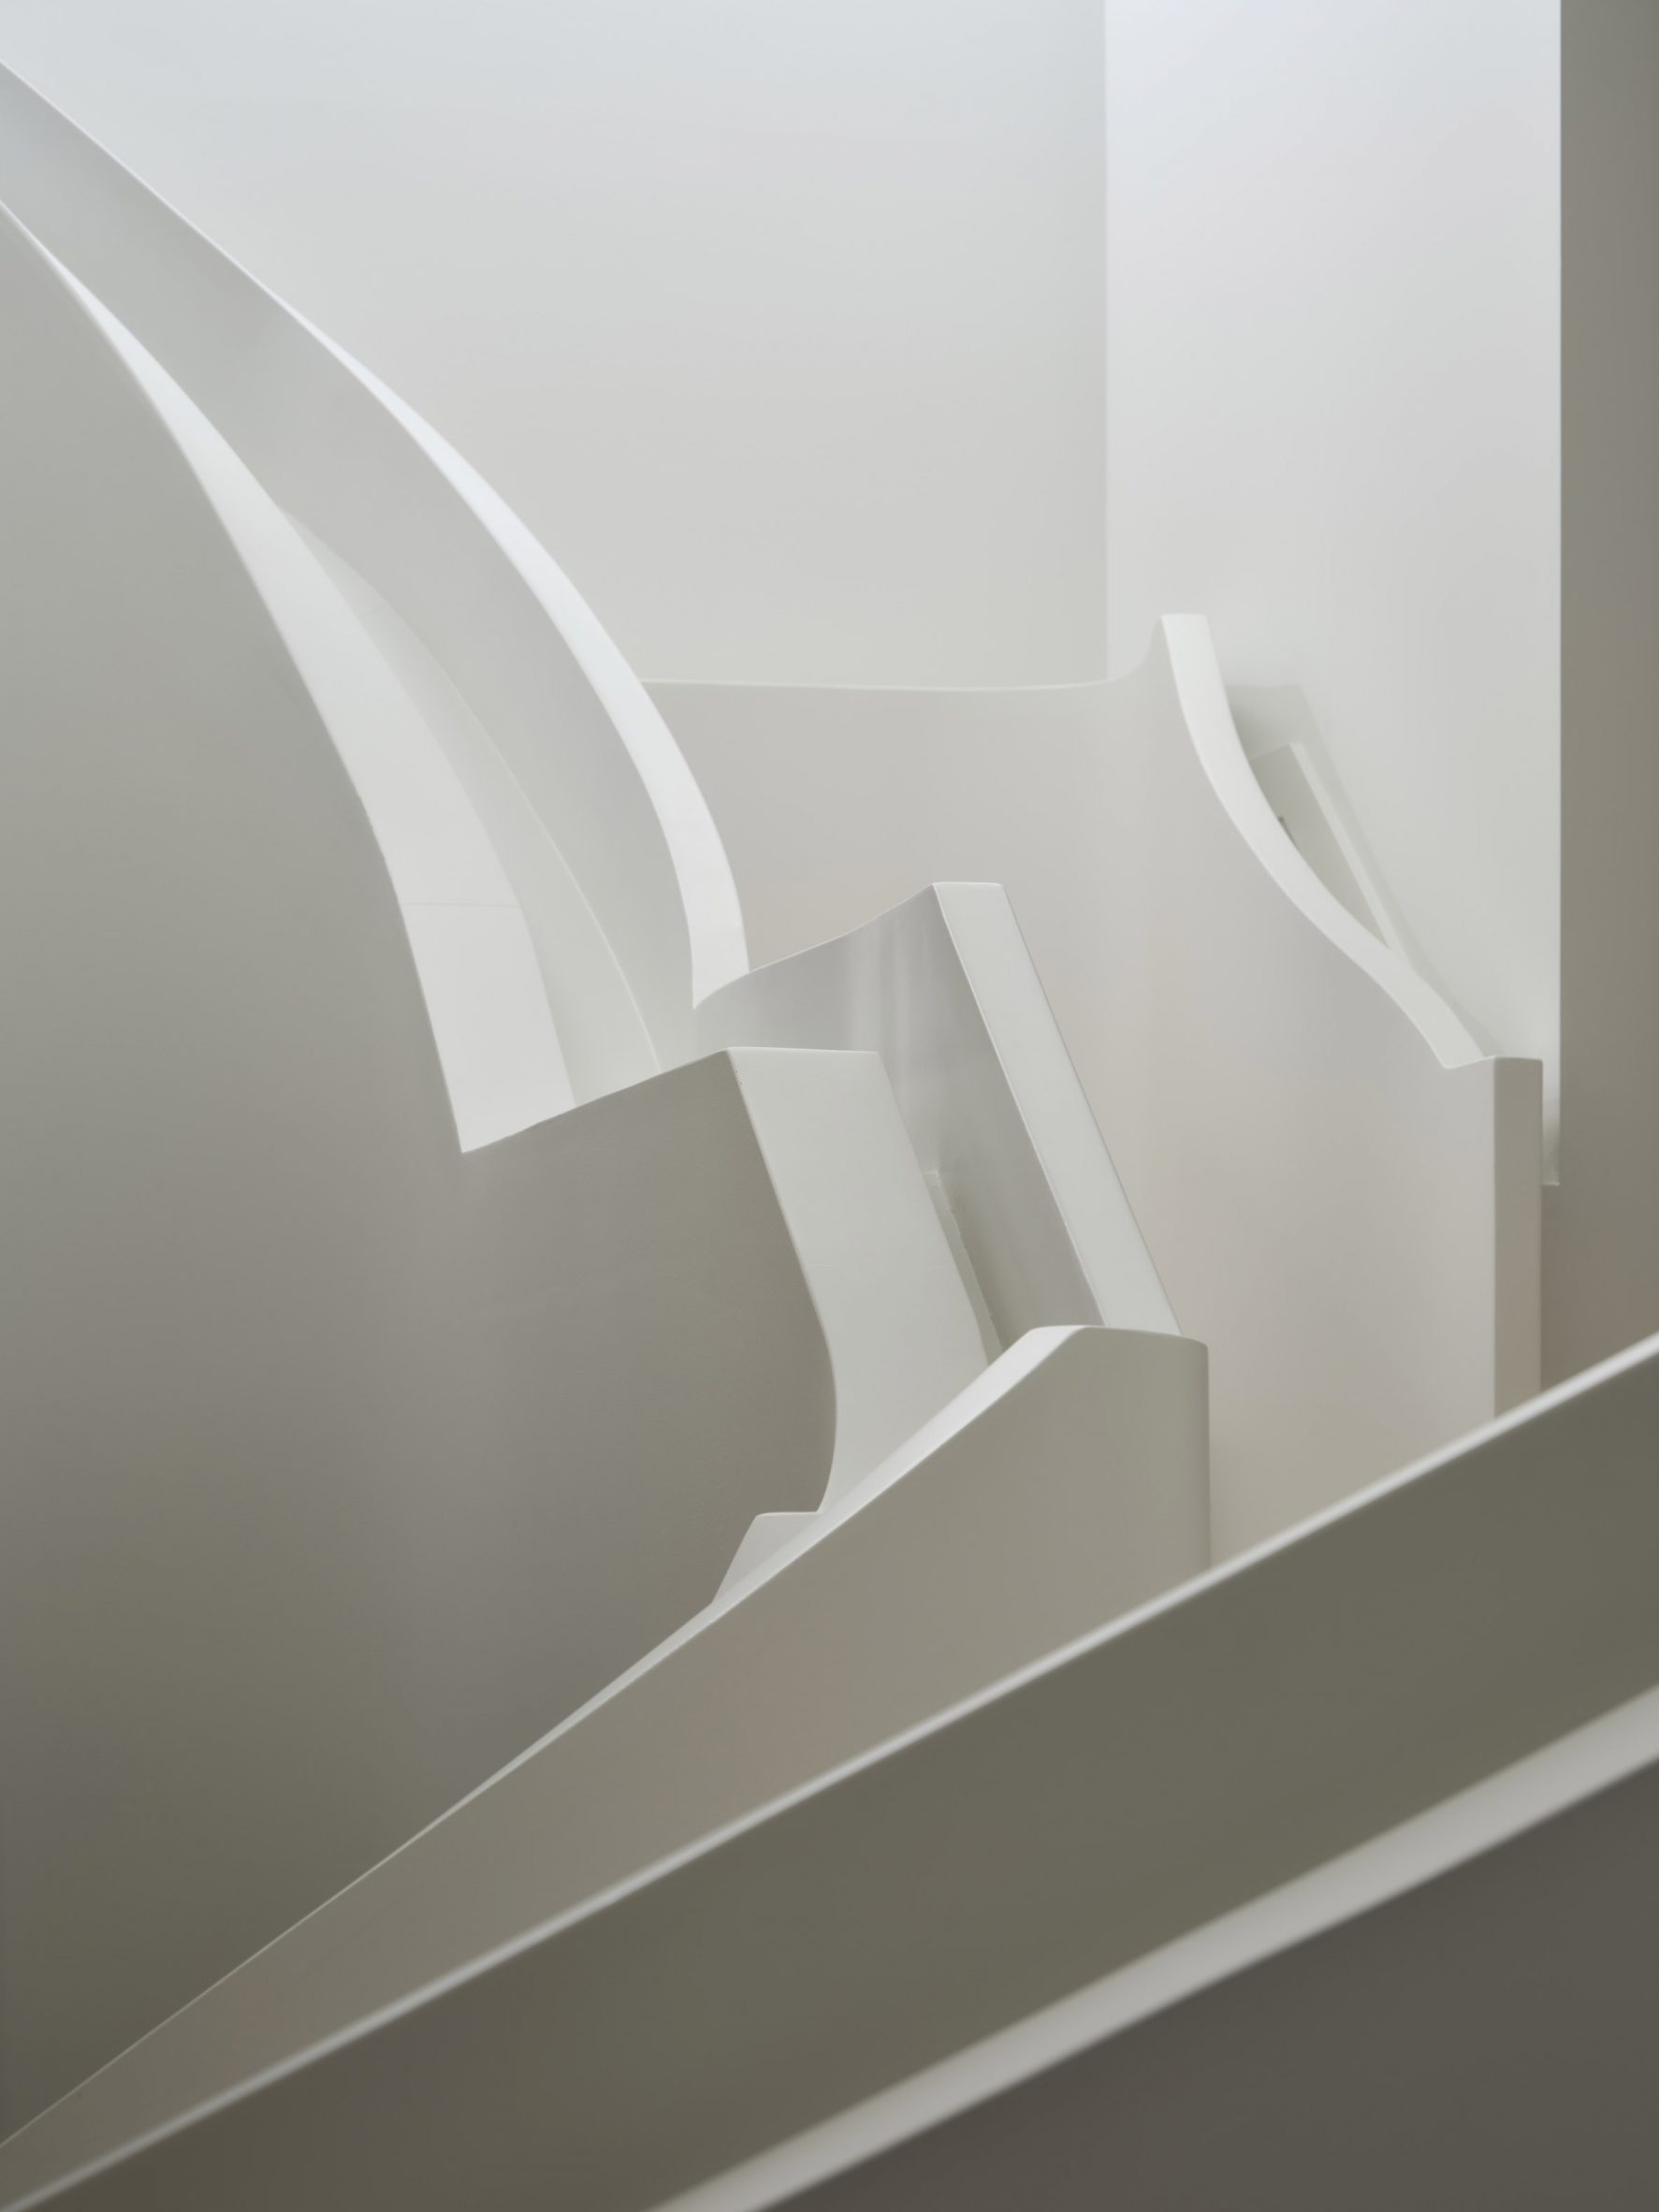 Sculptural staircase featuring layered bannisters, stepped profiles and curved form